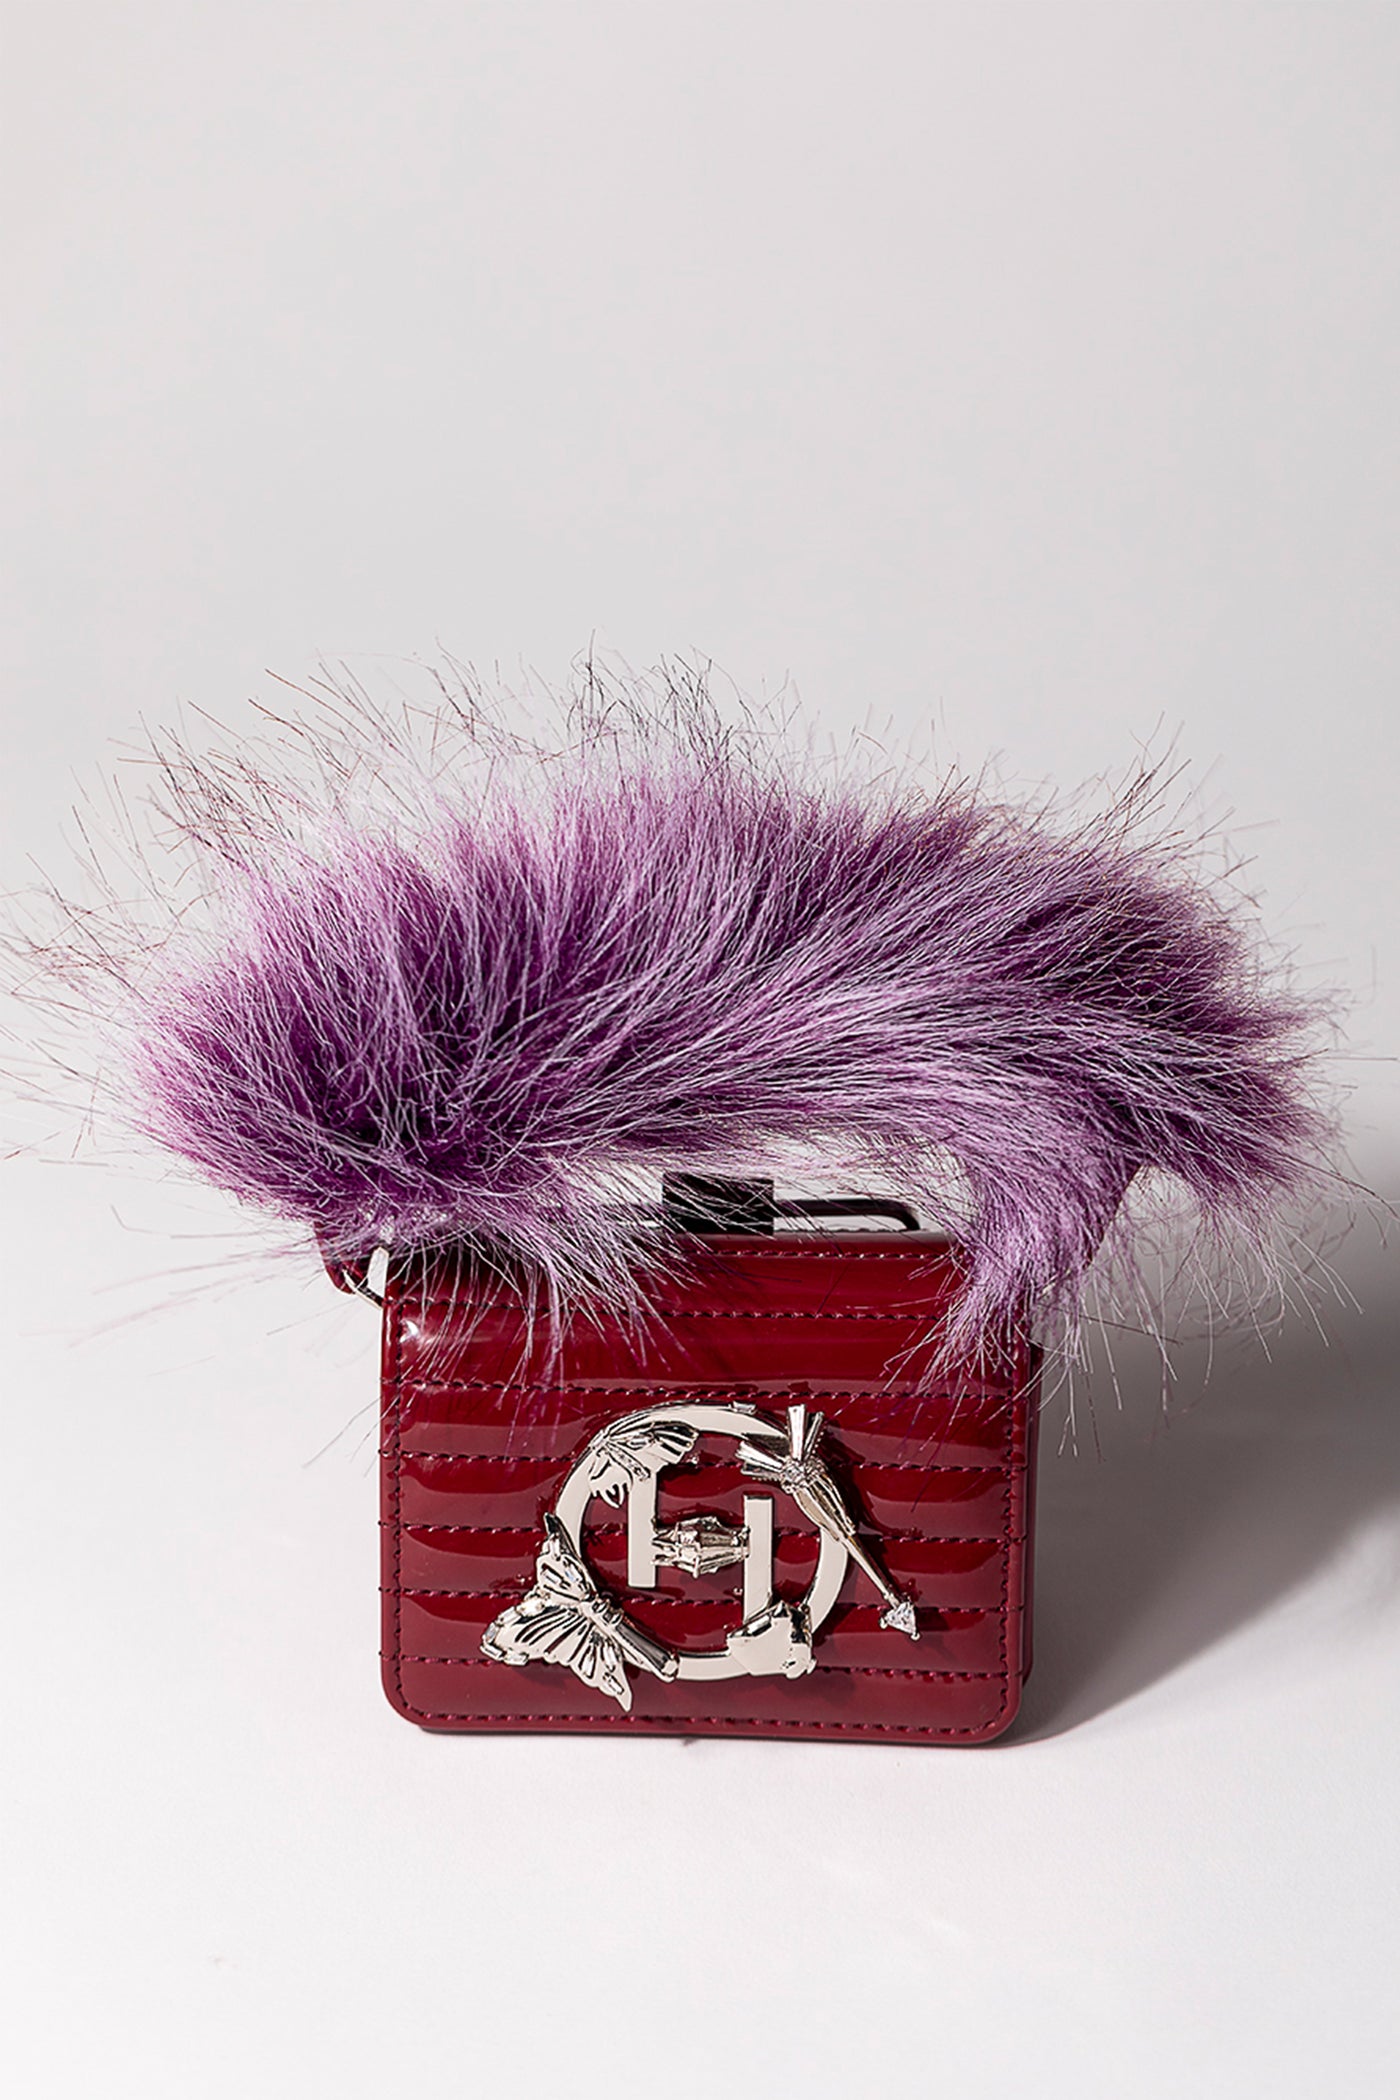 outhouse jewellery The Oh V Furbie - Marilyn Maroon bags accessories red online shopping melange singapore indian designer wear